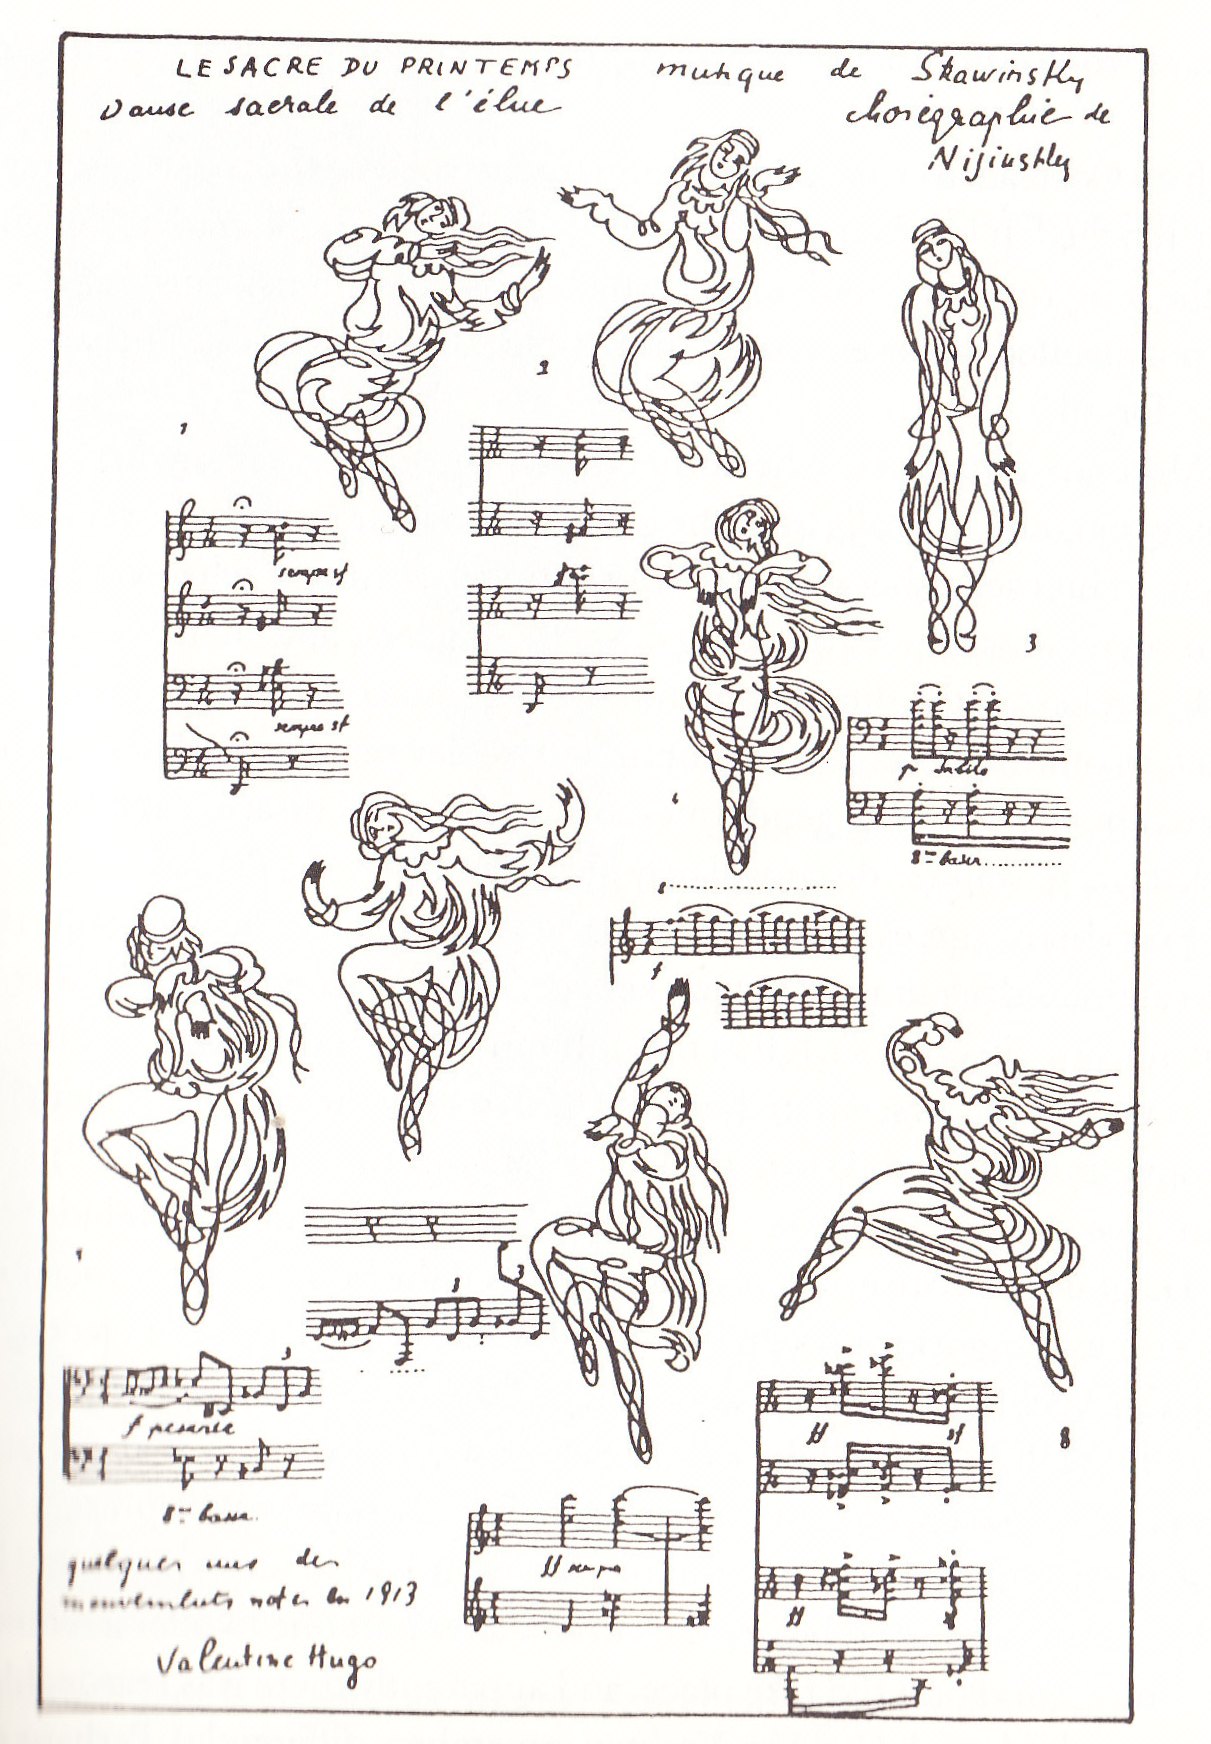 Drawing of Marie Piltz in the "Sacrificial Dance" from The Rite of Spring, Paris, 29 May 1913 (source: wiki)